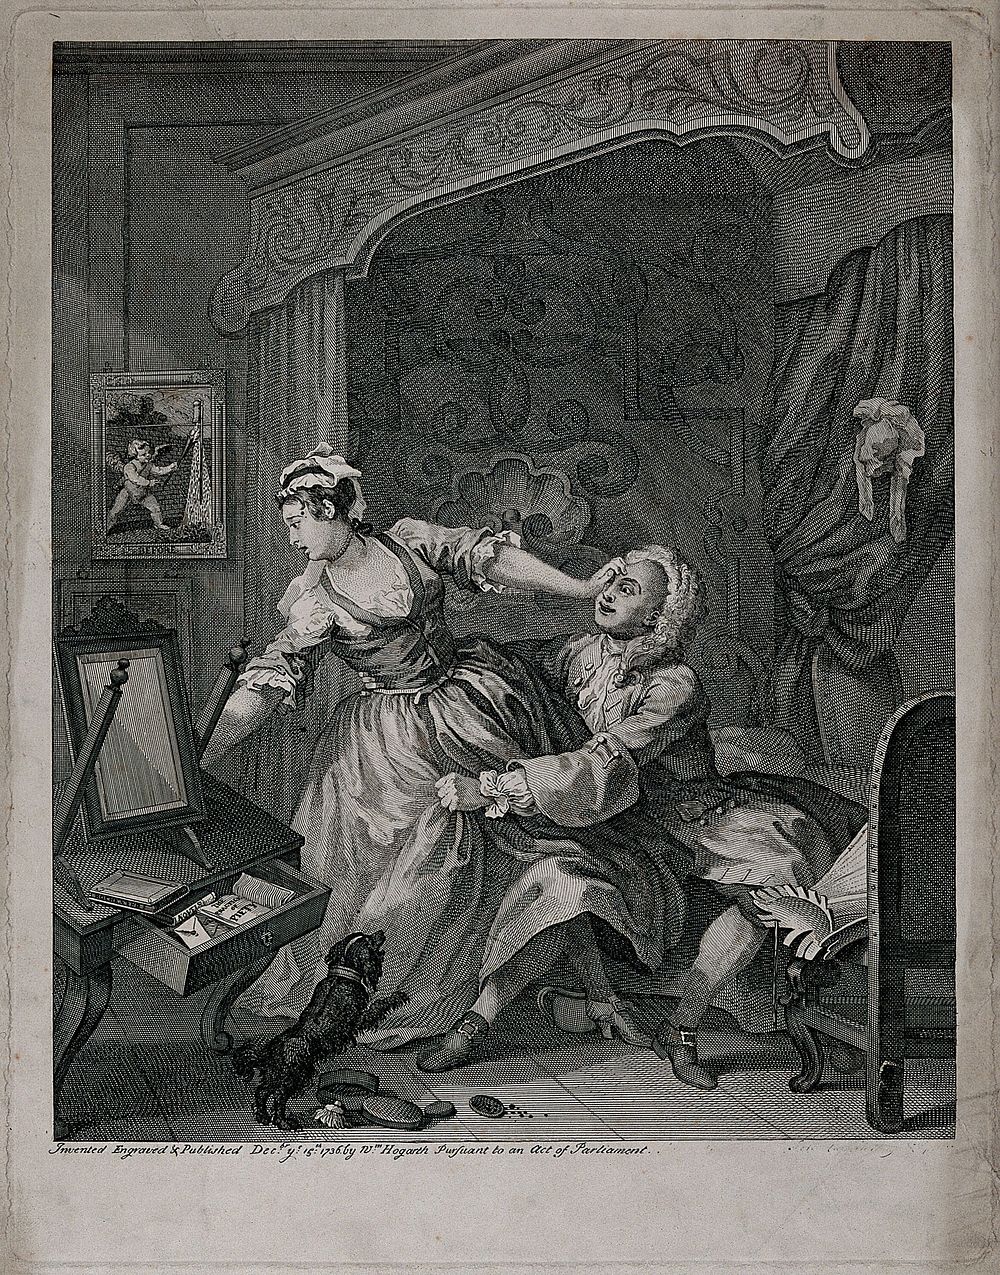 In a lady's bedchamber a young woman struggles as a man pulls her towards him clutching at her dress. Engraving by W.…